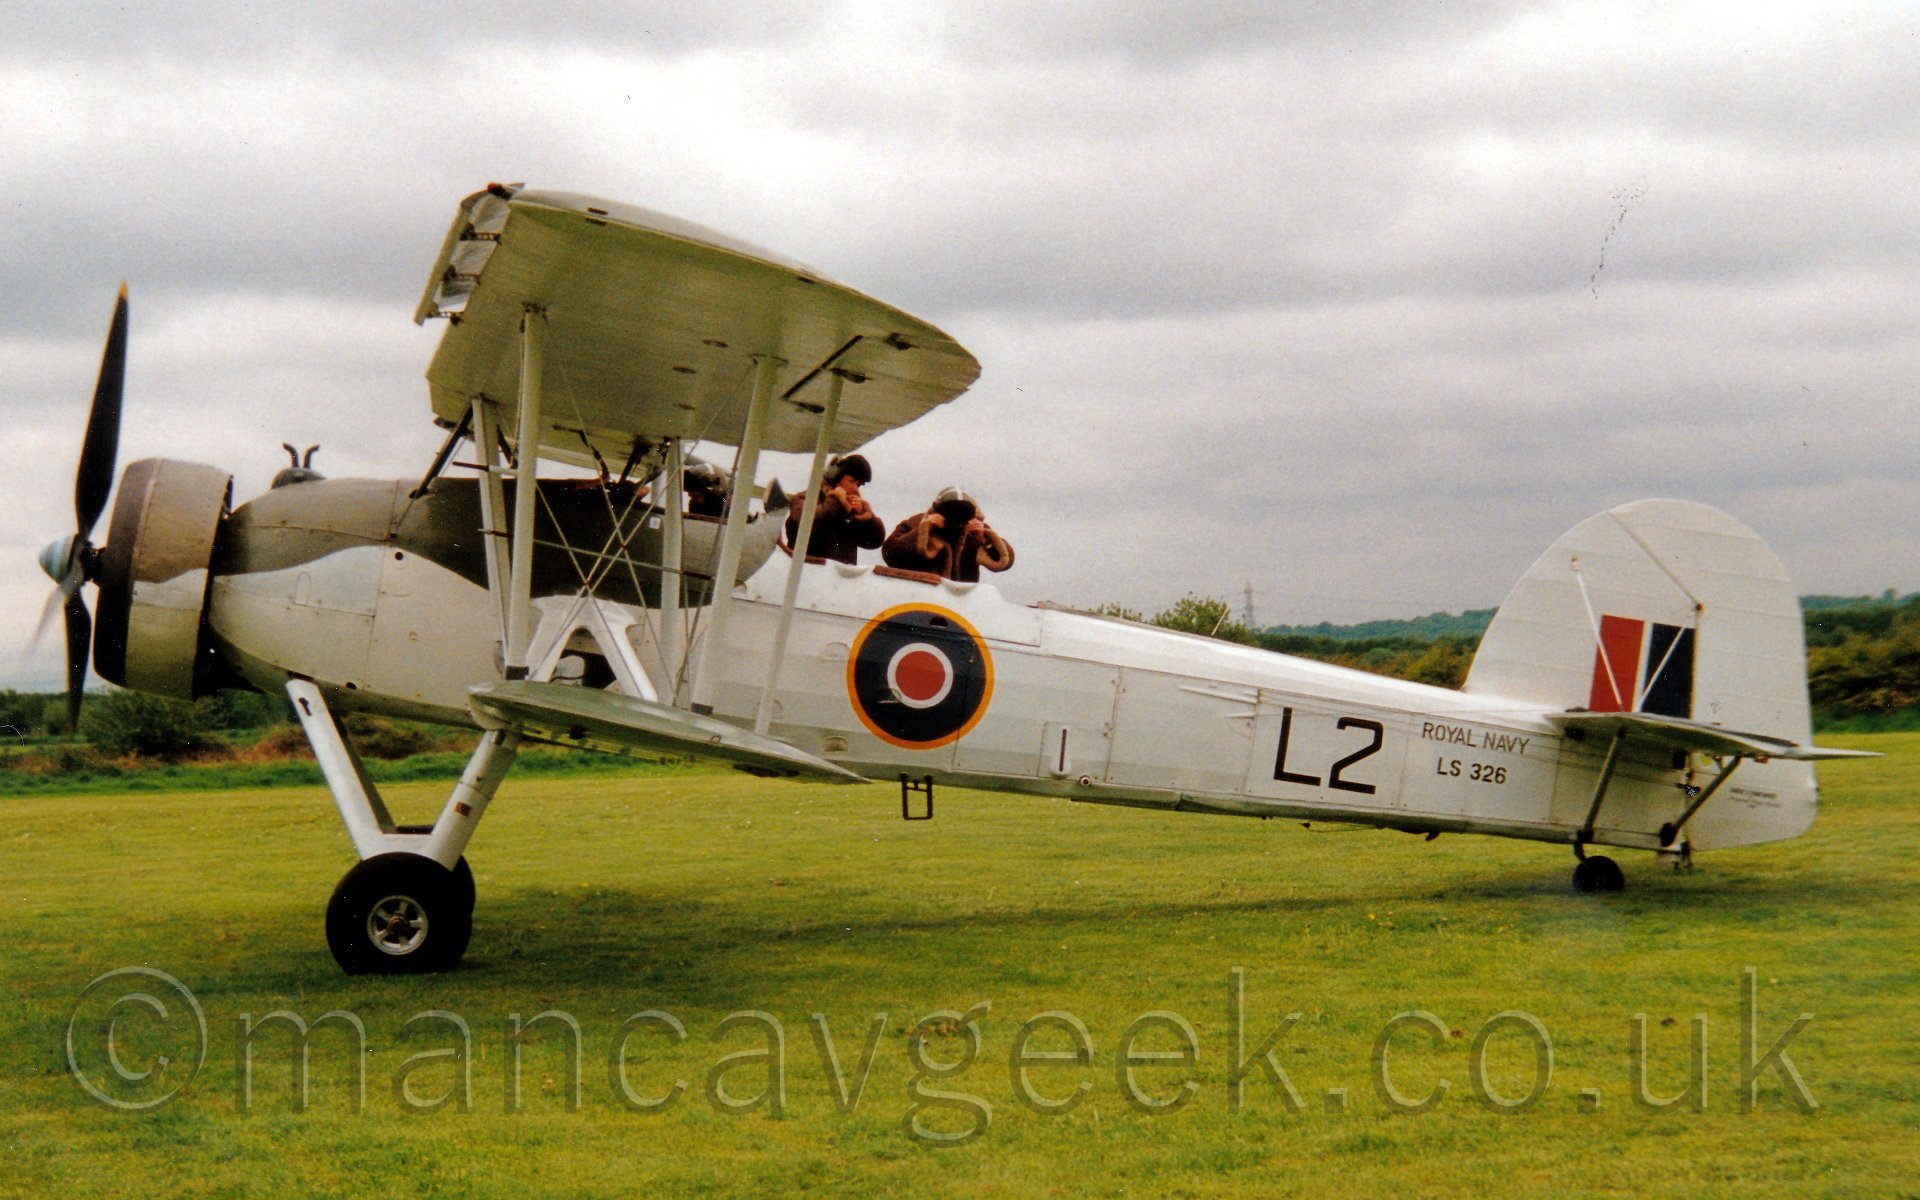 Side view of a World War II-era single engined biplane parked on grass facing to the left. The plane is mostly white, with an olive green section over the top of the nose and the engine cowling. There are 3 open cockpit positions, with the front one containing a helmeted pilot looking down at his instruments, the other two having helmeted crew wearing heavy fur coats standing and adjusting their helmets. below the rear cockpit is a yellow, blue, white, and red roundel. On the rear fuselage are large "L2" titles, with smaller "Royal Navy" and "LS326" titles further back. There are short, vertical red and blue bands on the tail. In the background, bushes mark the perimeter of the airfiled, sctretching off to the horizon, under a cloudy grey sky.